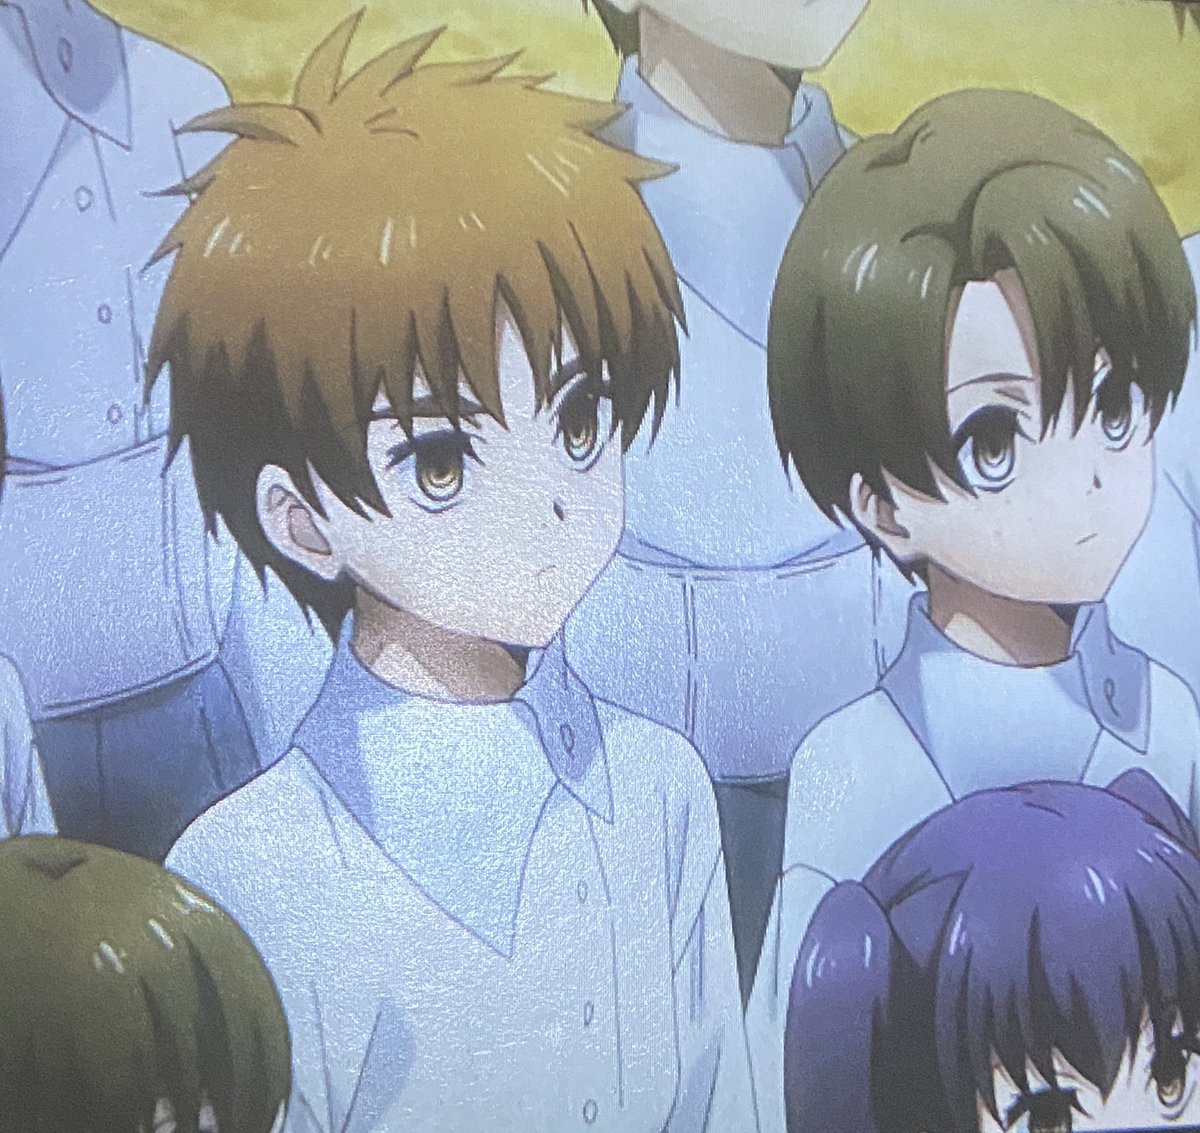 Mini Syaoran spotted in The Grimm Variations @Sapphire_Icarus